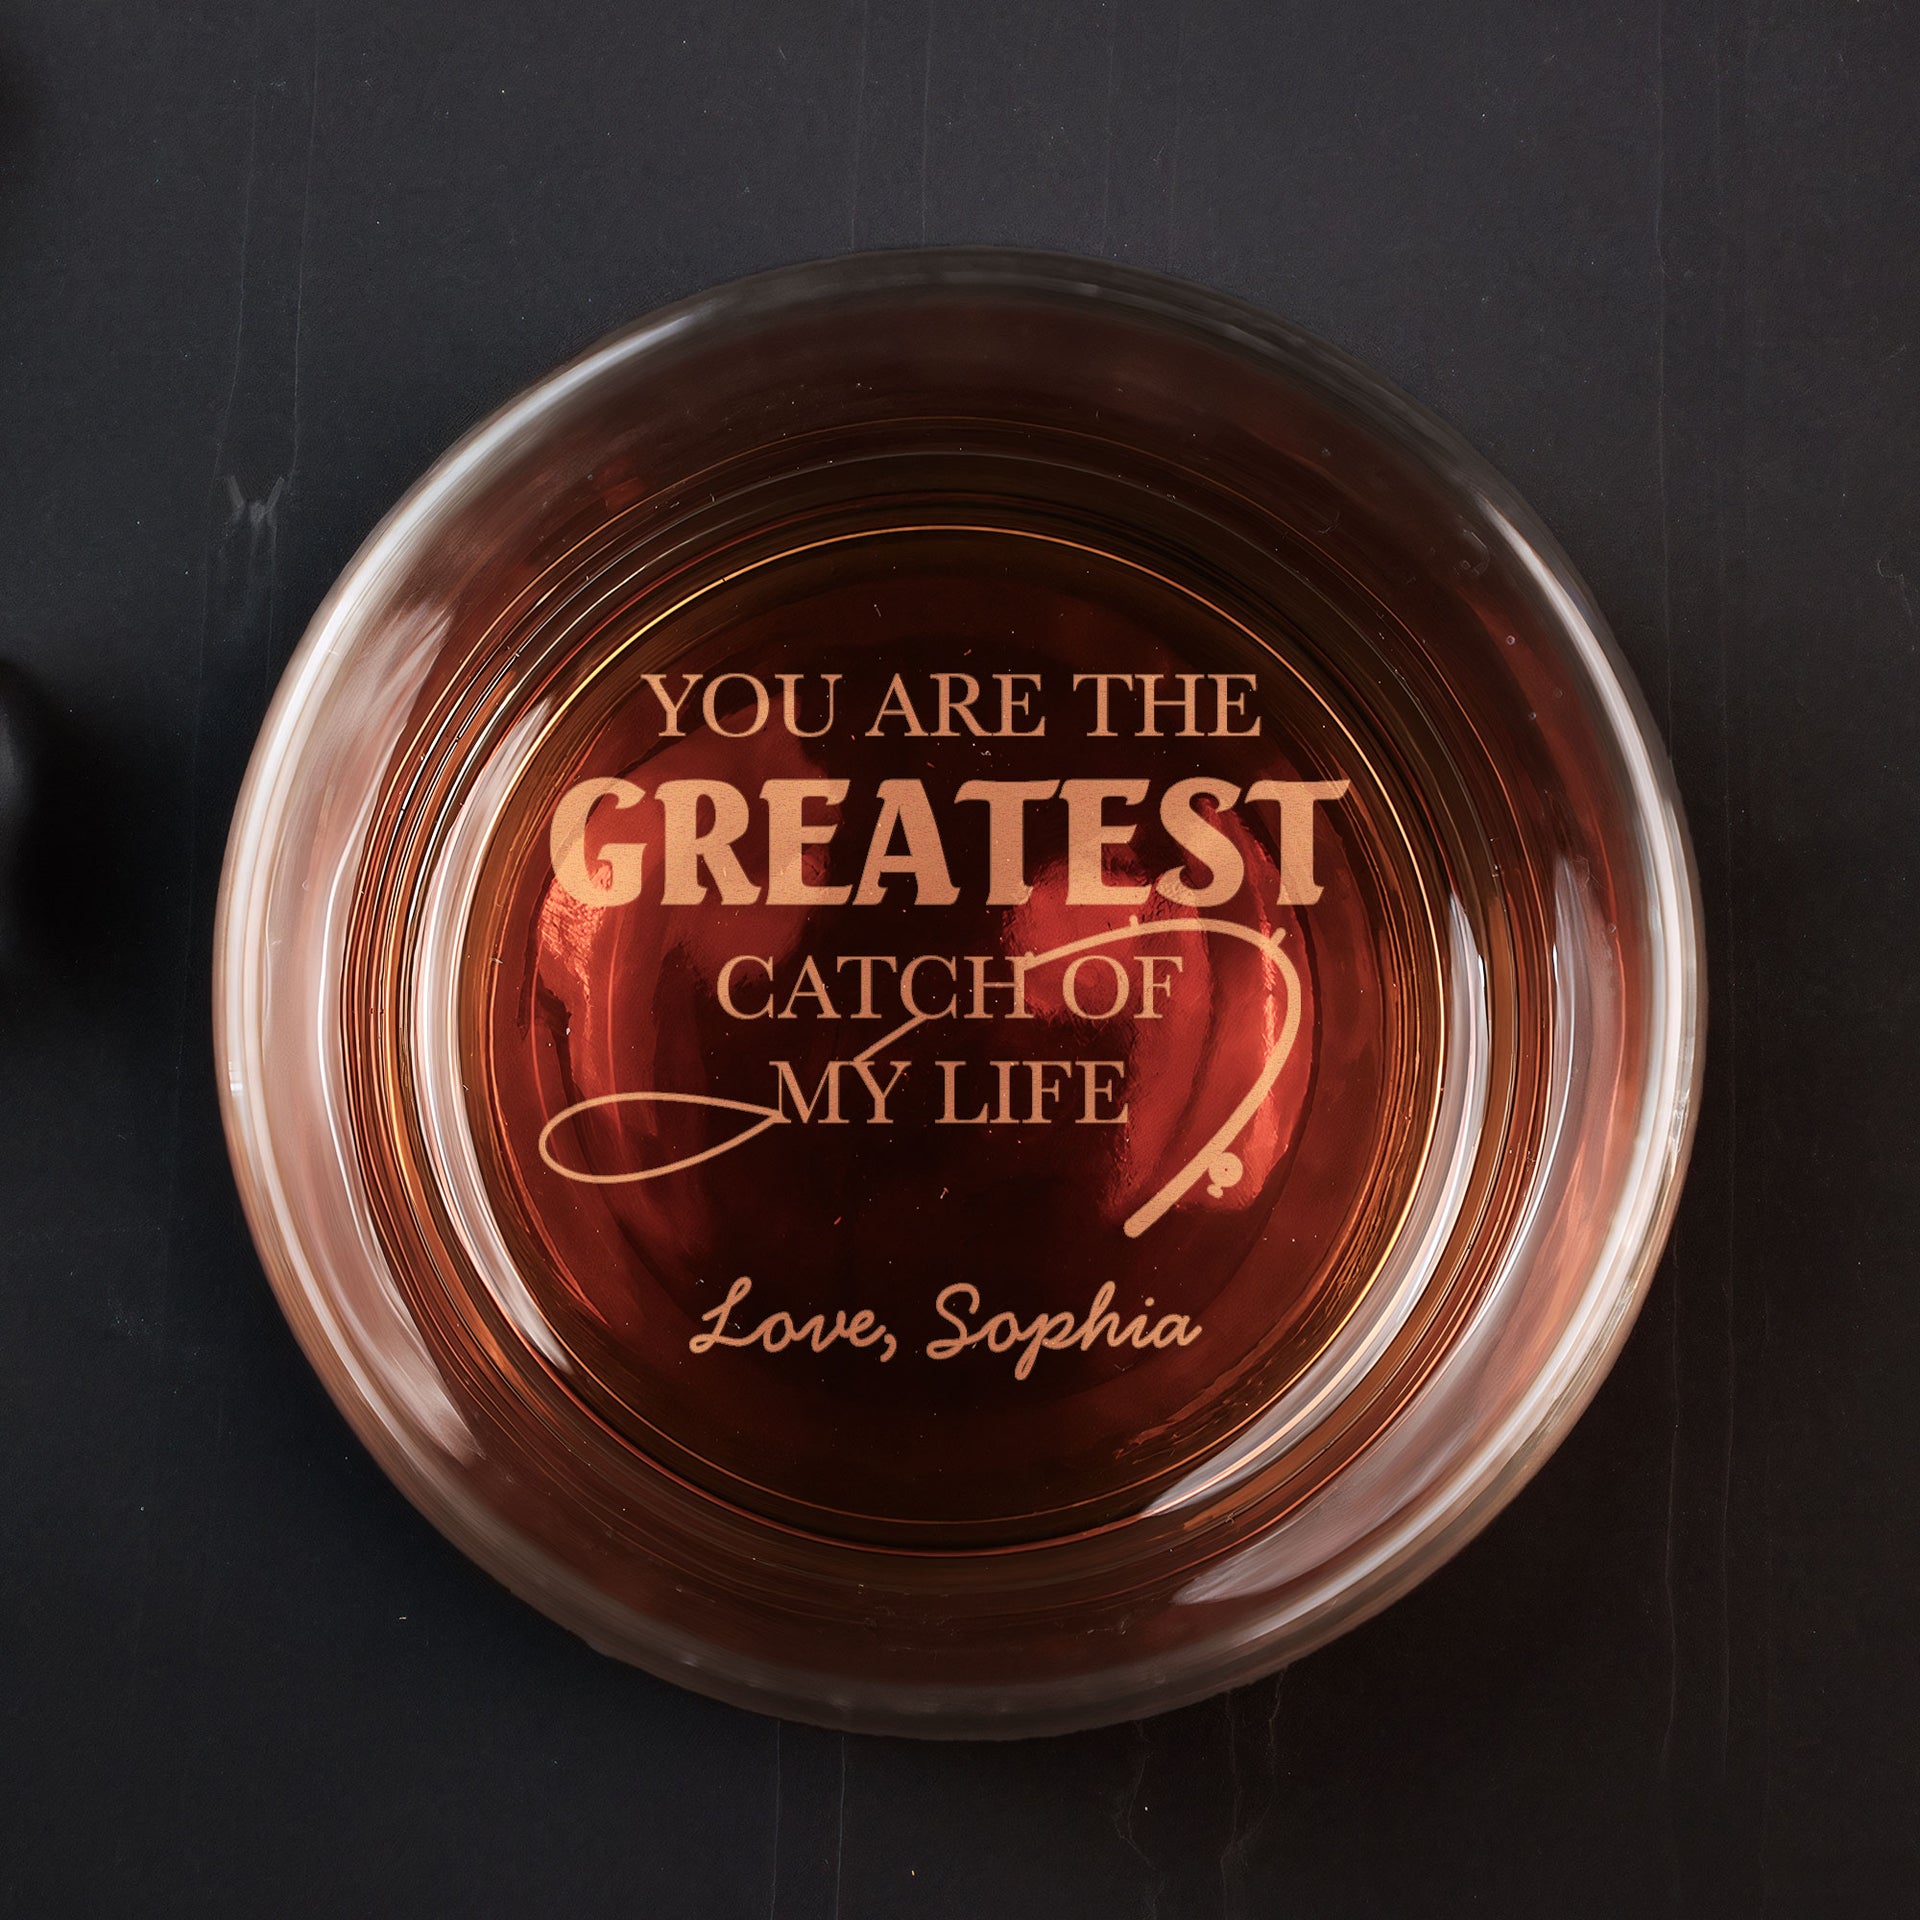 https://macorner.co/cdn/shop/files/You-Are-The-Greatest-Catch-Of-My-Life-Personalized-Engraved-Whiskey-Glass_1.jpg?v=1712927413&width=1920